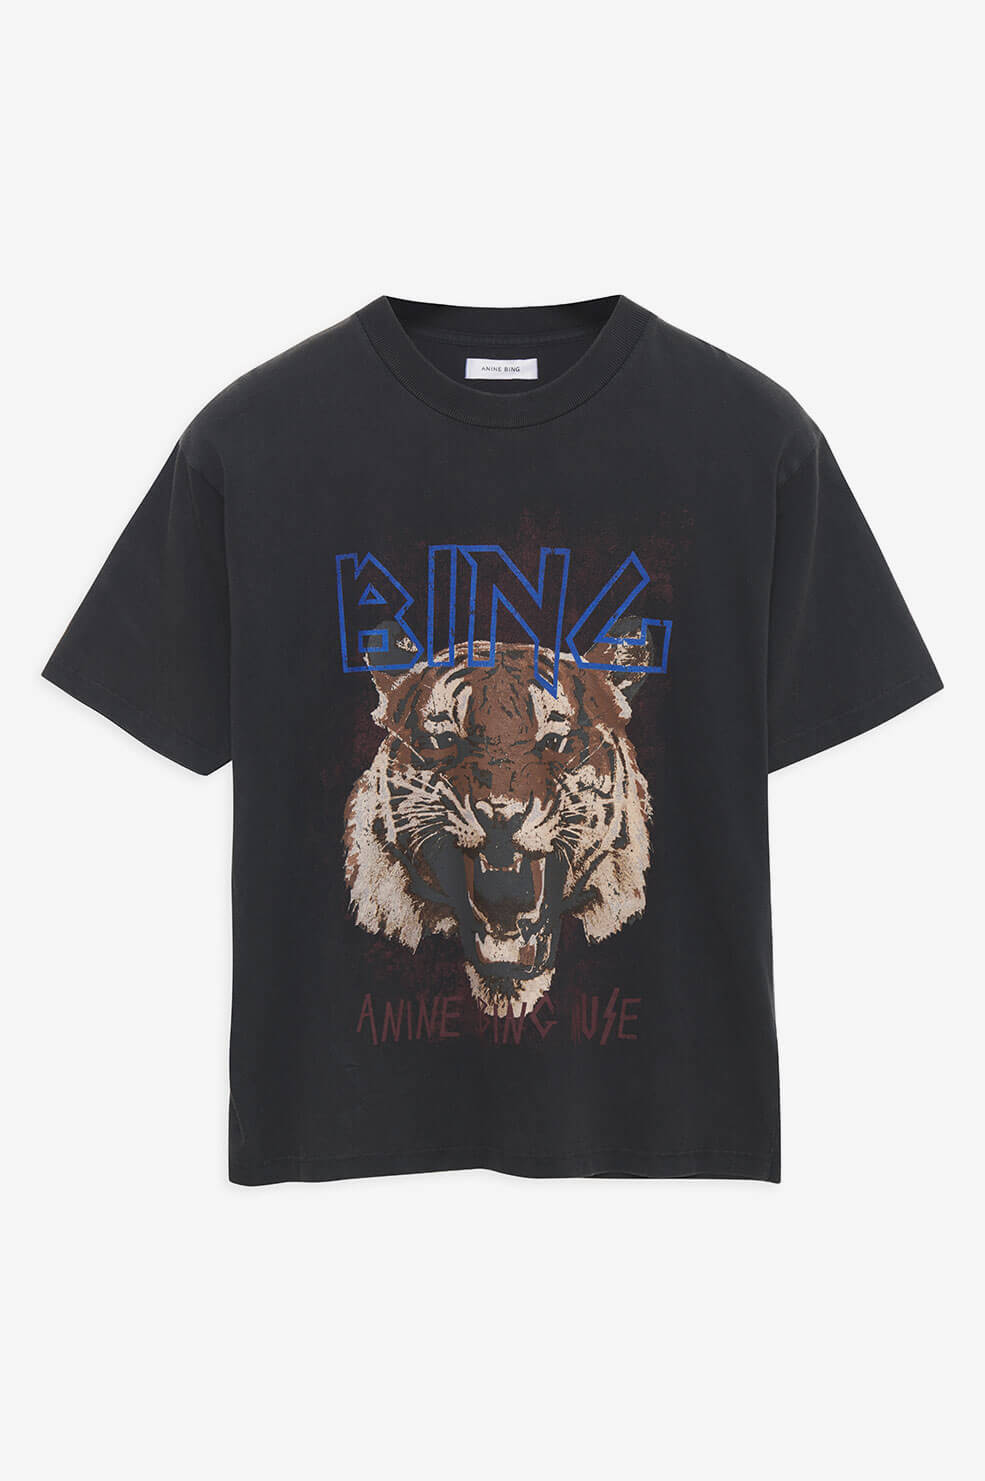 ANINE BING - TIGER TEE - BLACK - FRONT VIEW